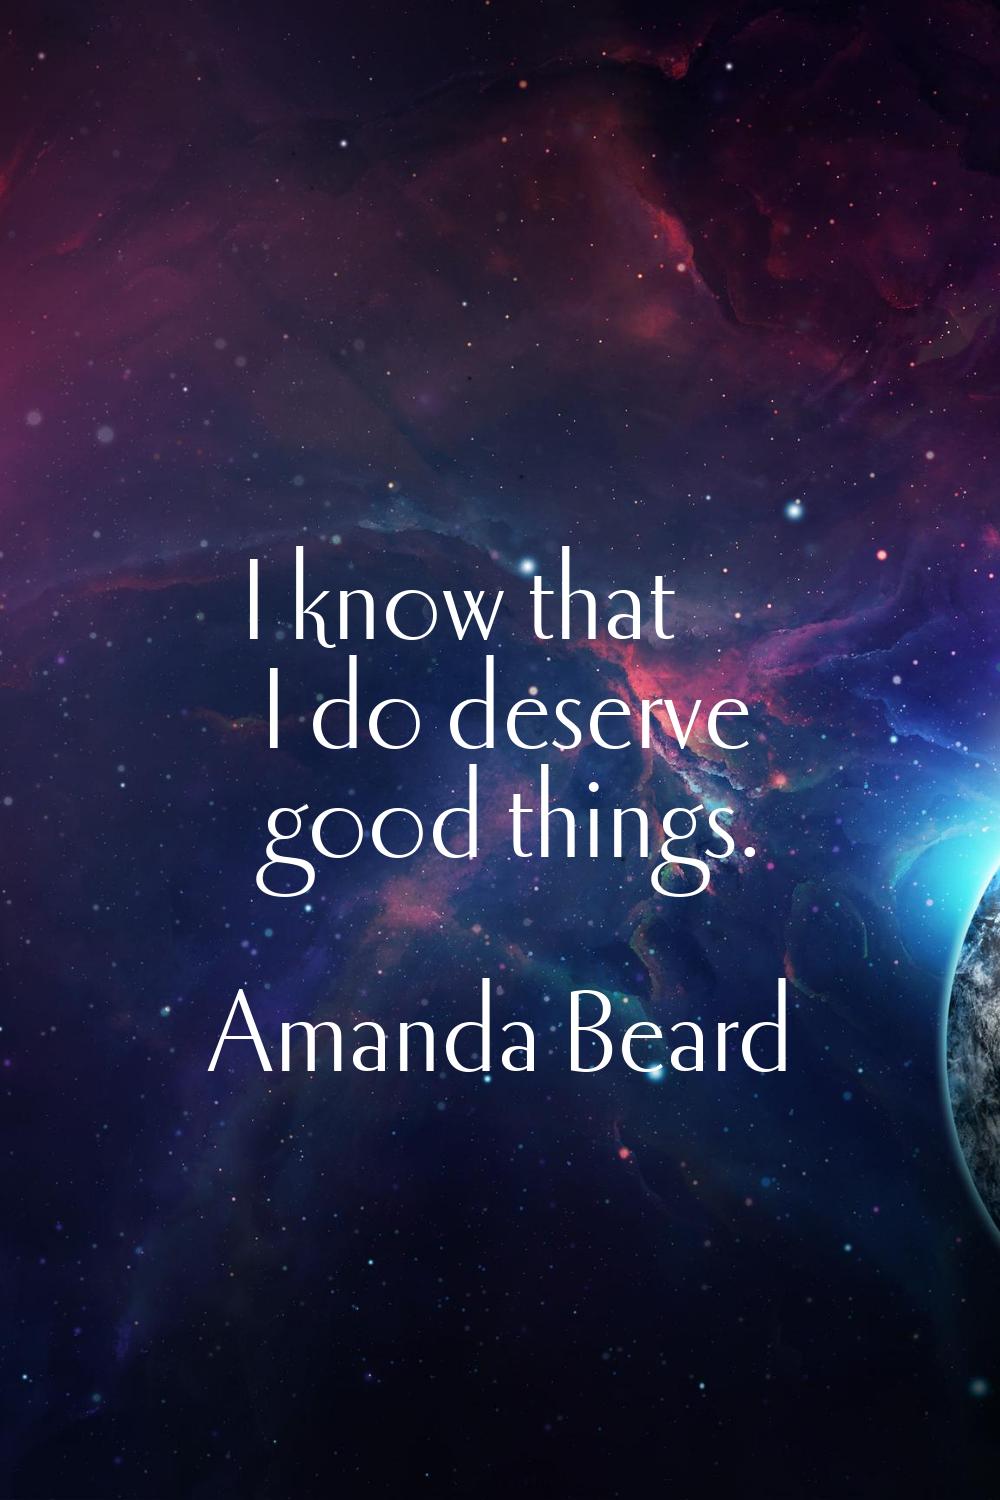 I know that I do deserve good things.